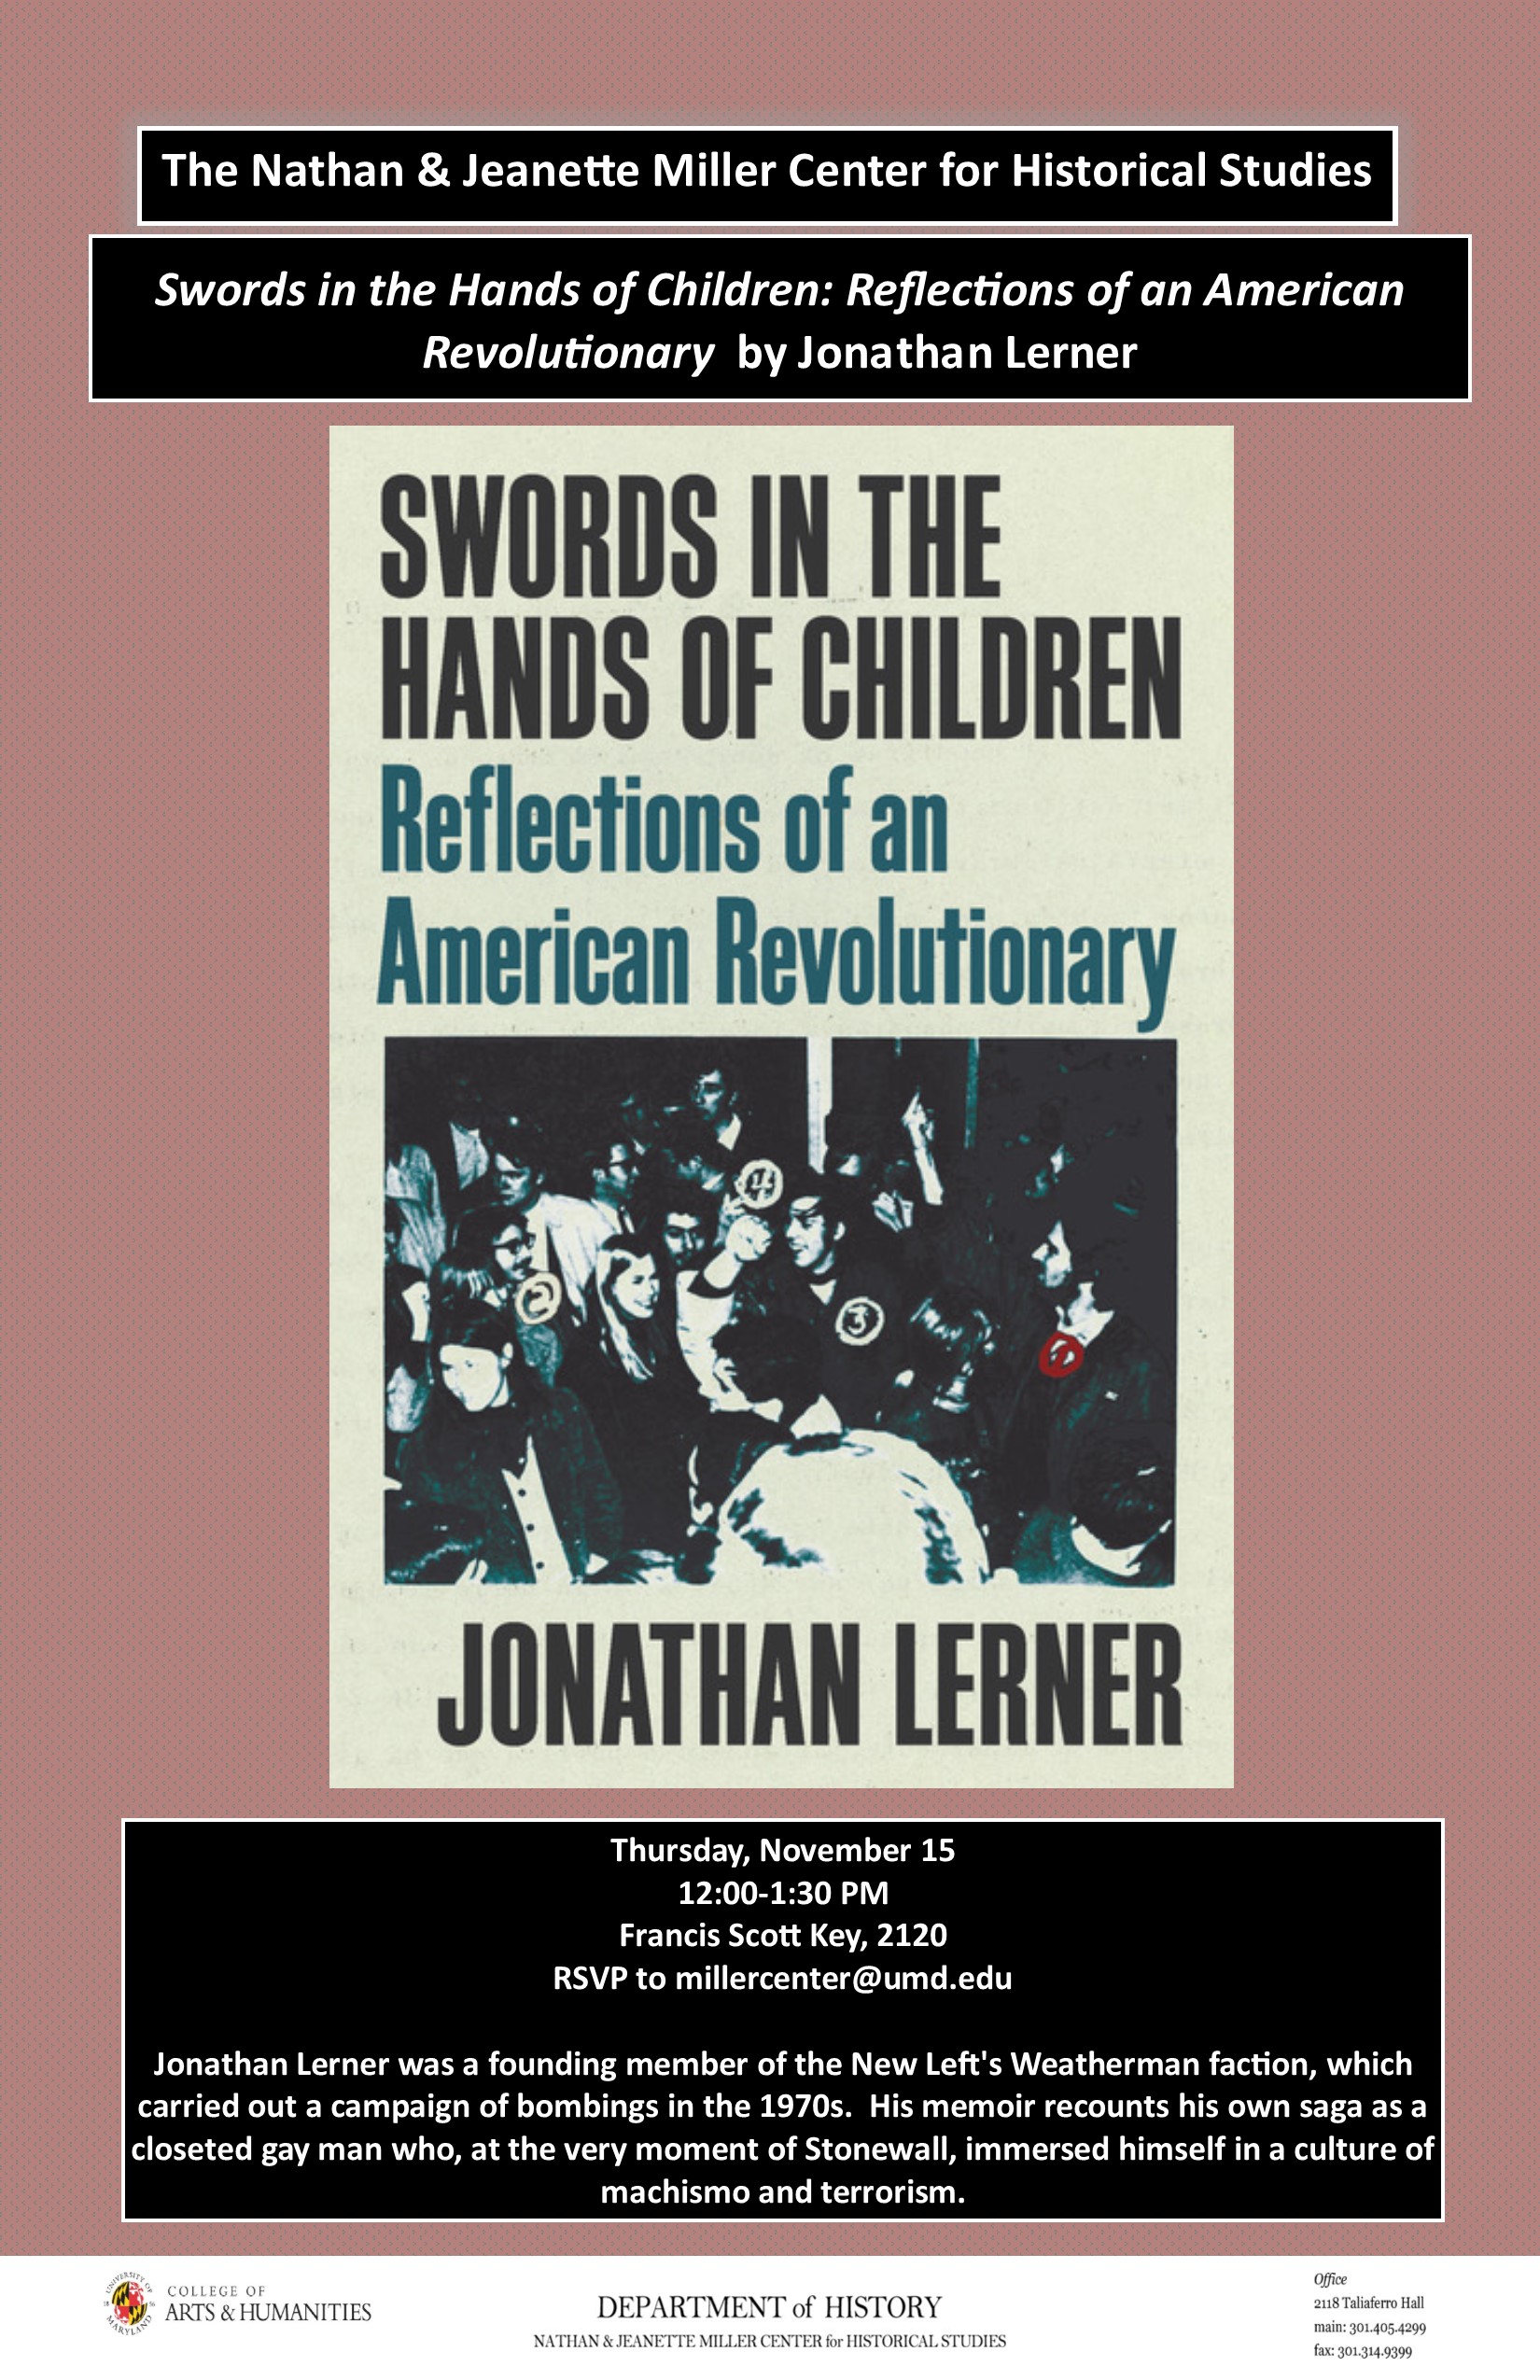 Image for event - Swords in the Hands of Children: Reflections of an American Revolutionary